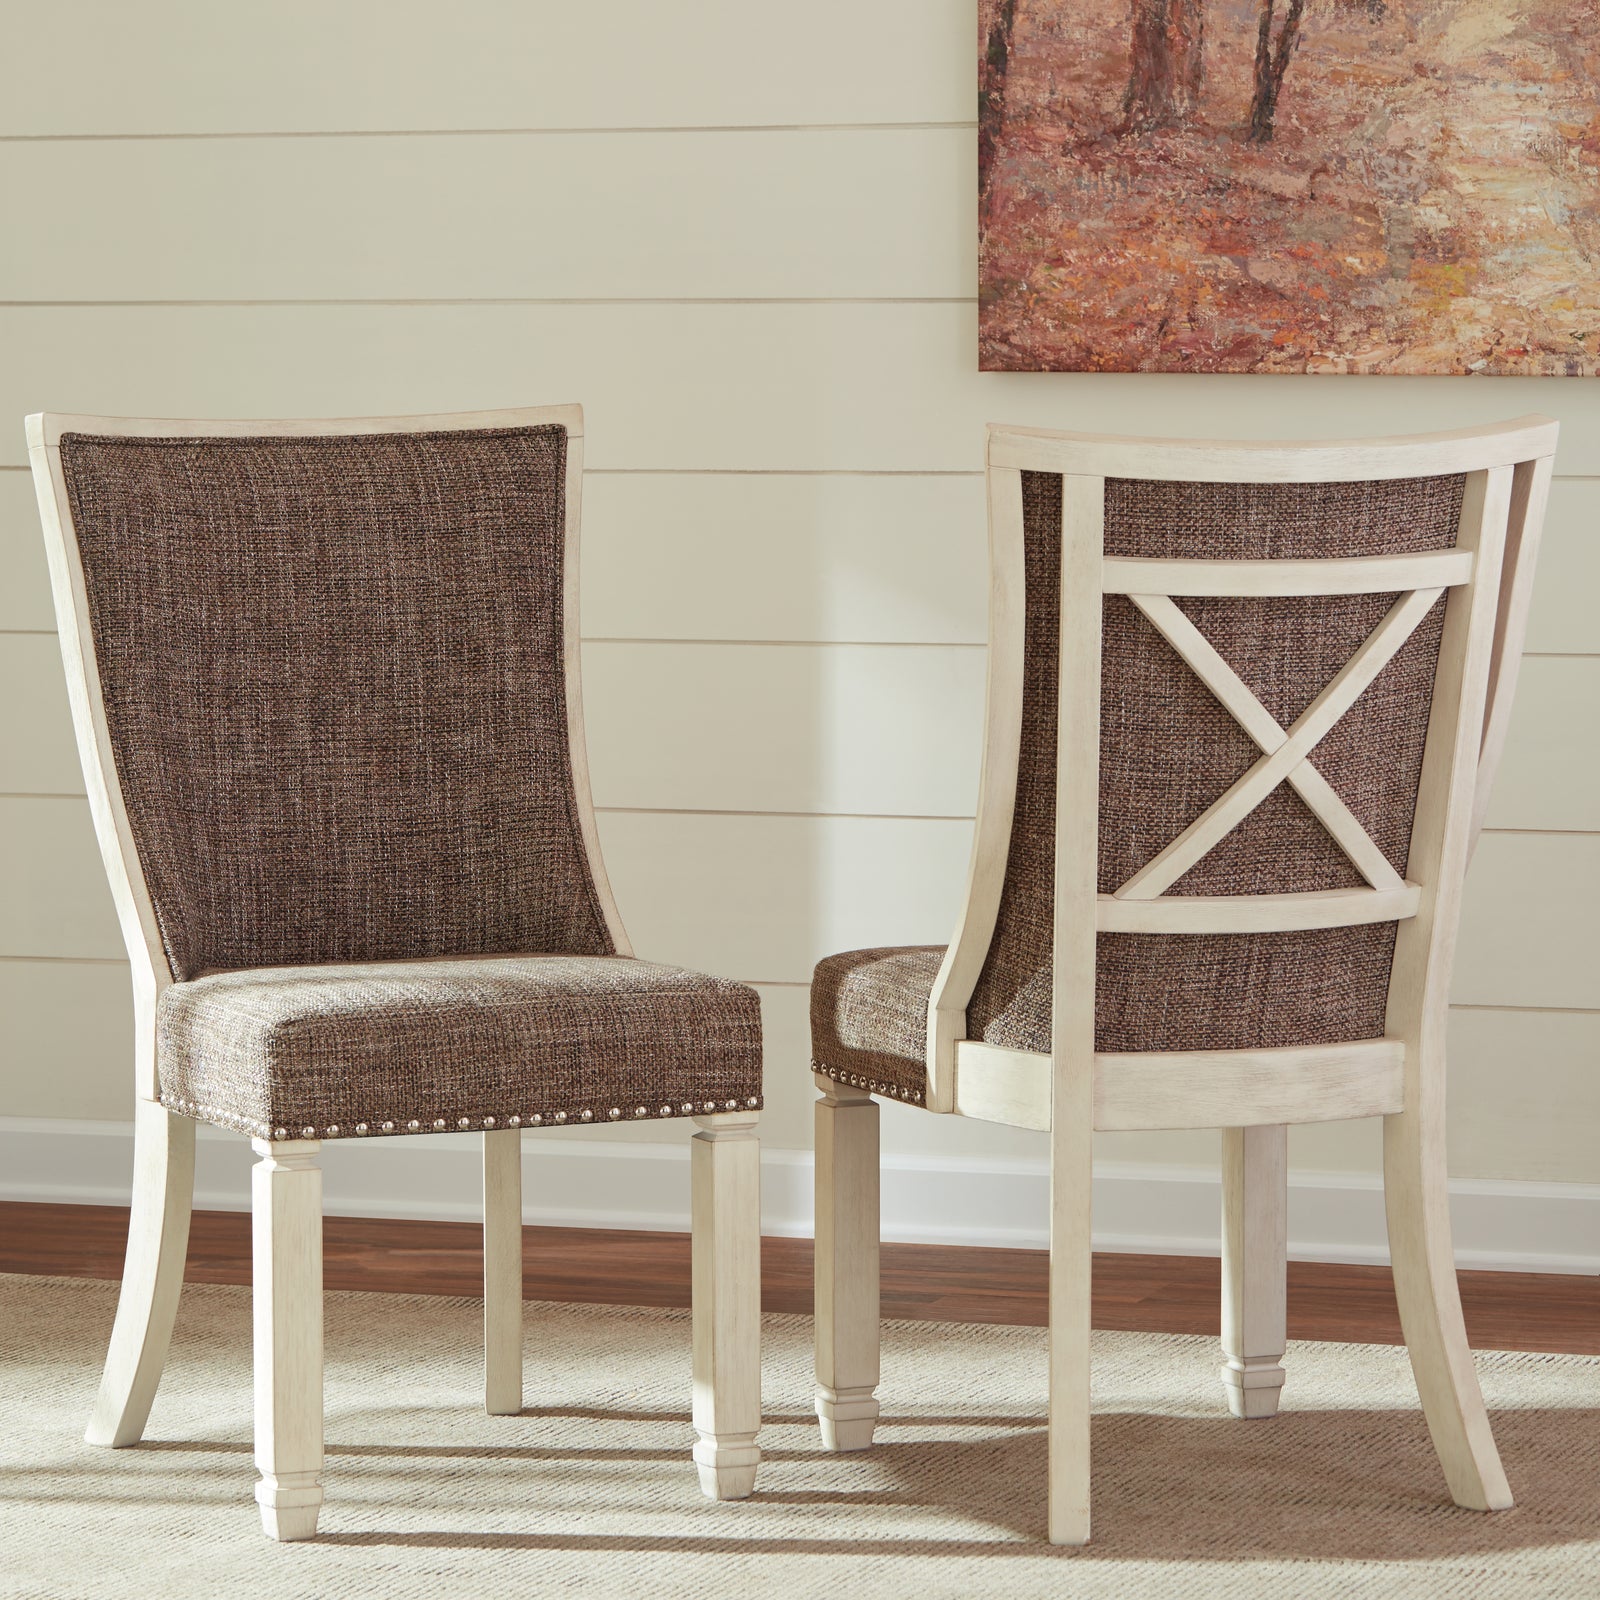 Bolanburg Two-tone 2-Piece Dining Room Chair